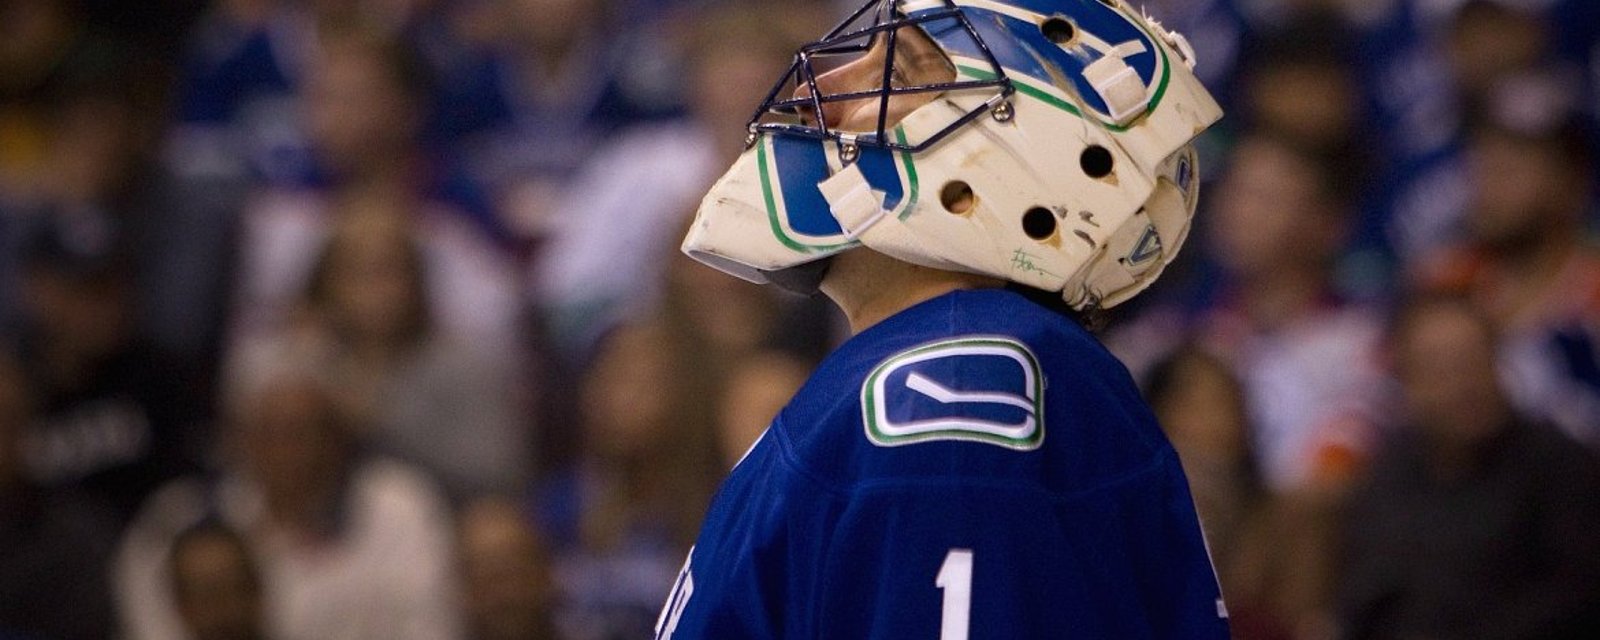 Brian Burke reveals Canucks’ HUGE asking price for Luongo in failed trade to Leafs 